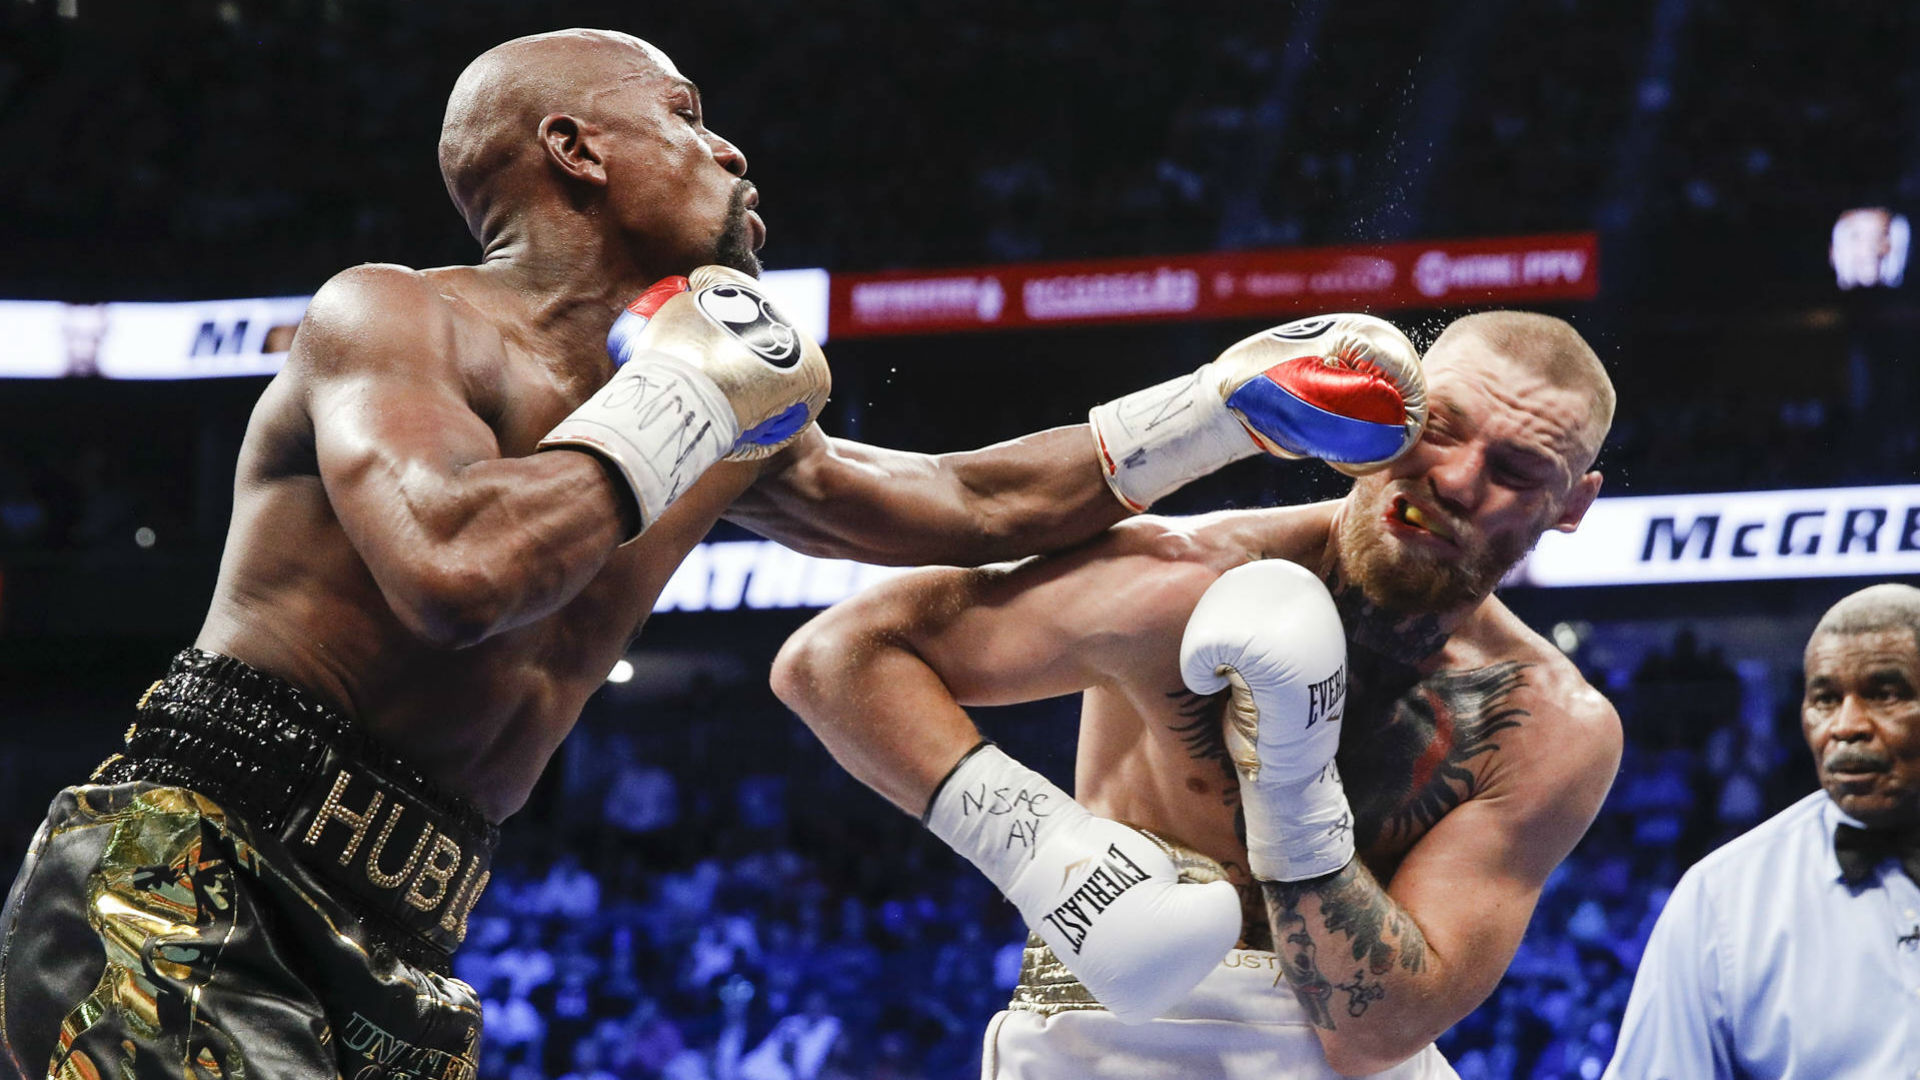 Mayweather vs. McGregor: Floyd Mayweather's 50-0 record comes with an asterisk ...1920 x 1080